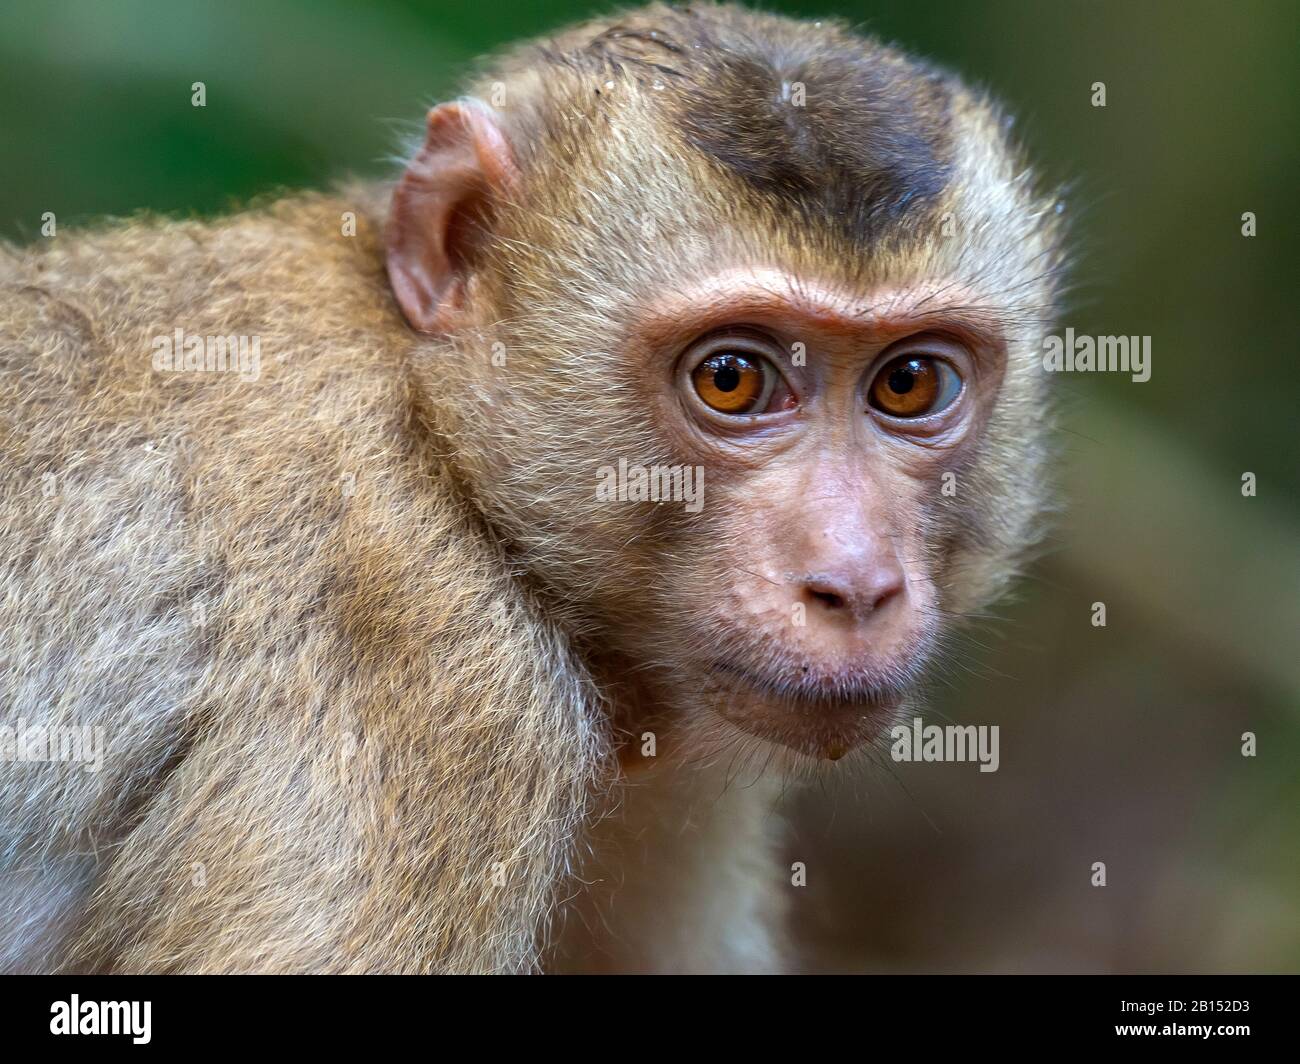 Northern pig-tailed macaque (Macaca leonina), young animal, portrait, Thailand, Khao Yai National Park Stock Photo